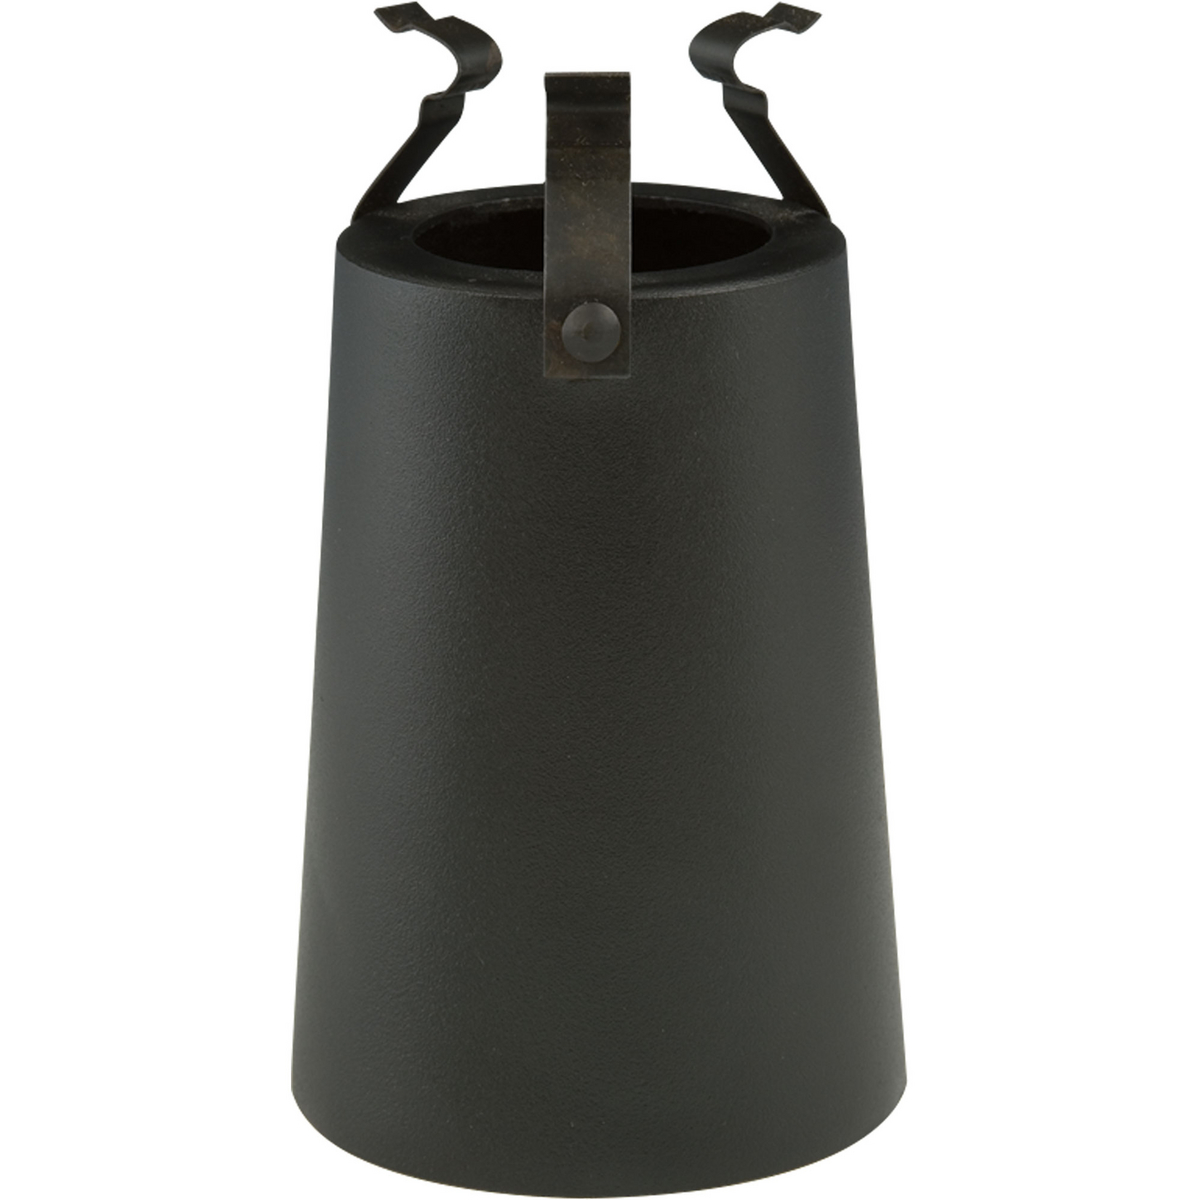 Patent Pending Dark Sky cup fits over the lamp to give ambient down light. Used with one-light medium base lamp facing down only. Black finish.